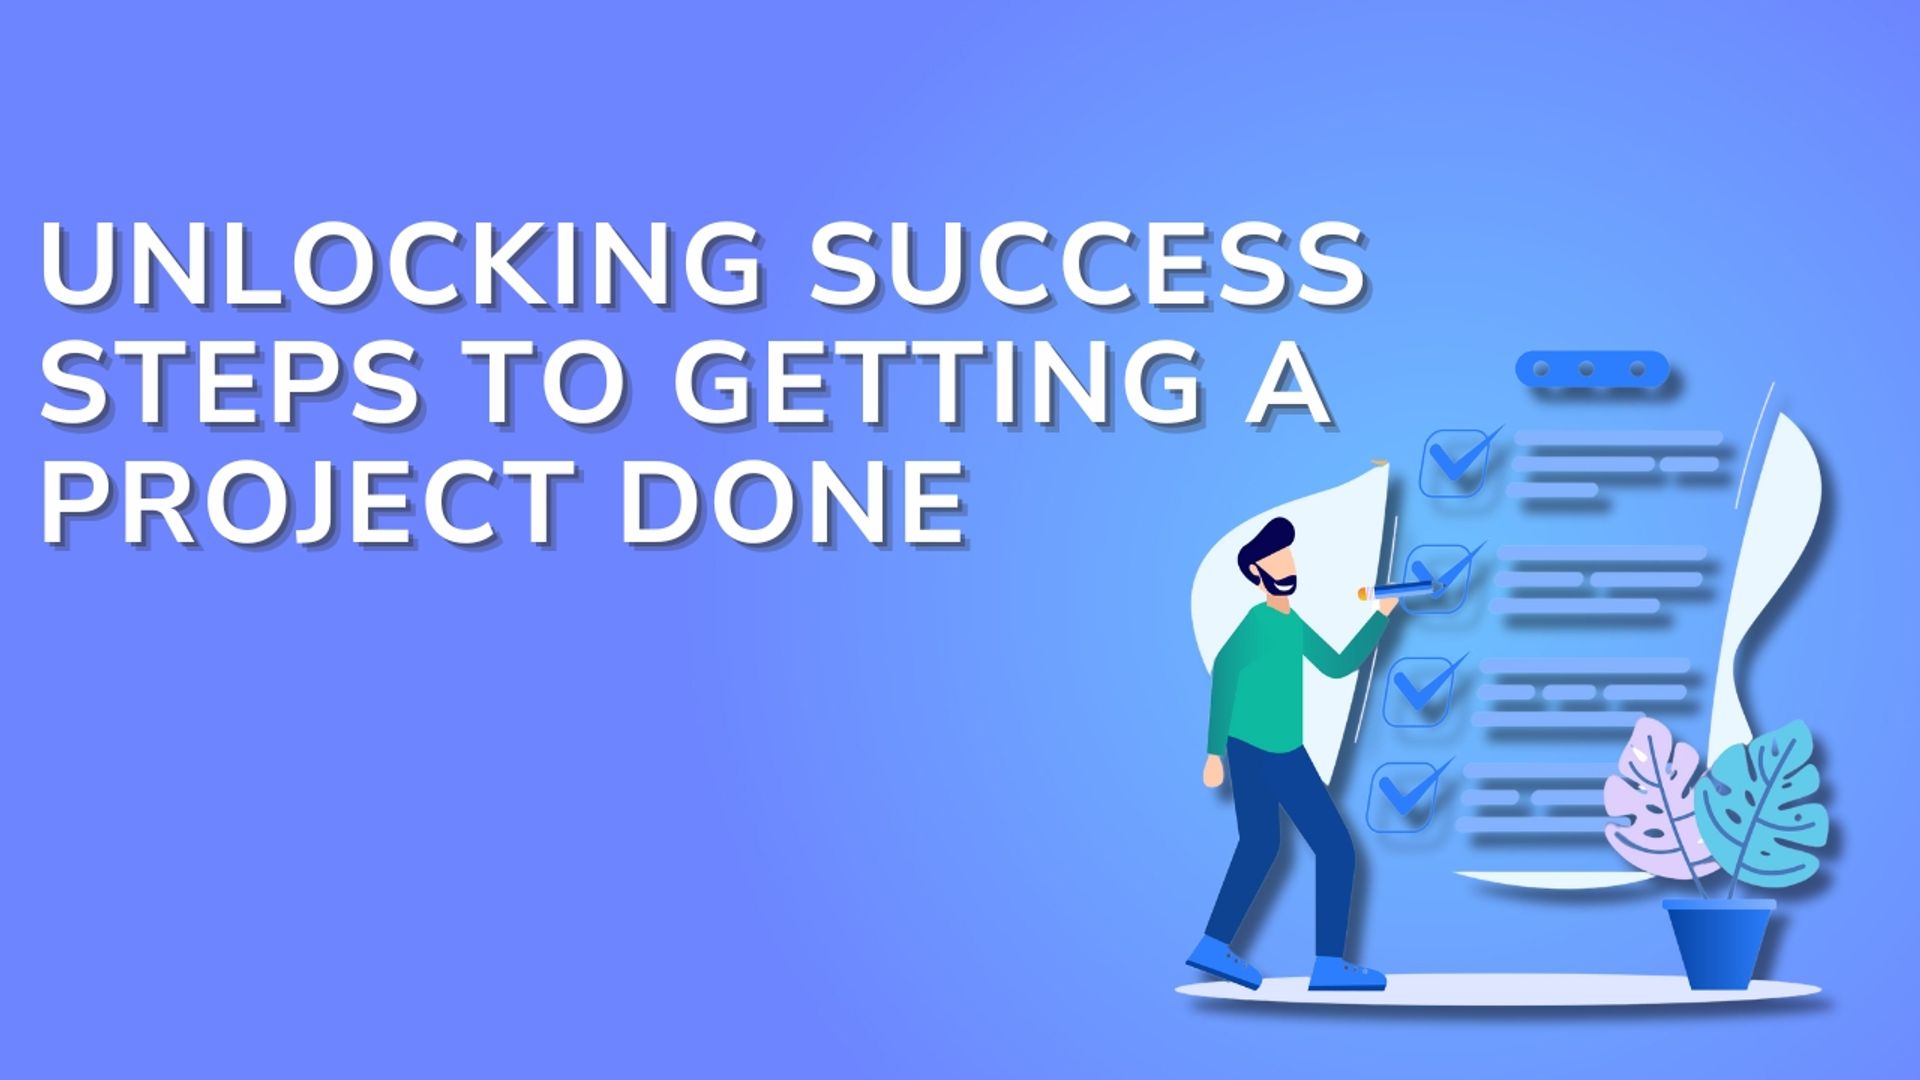 Steps to Getting a Project Done